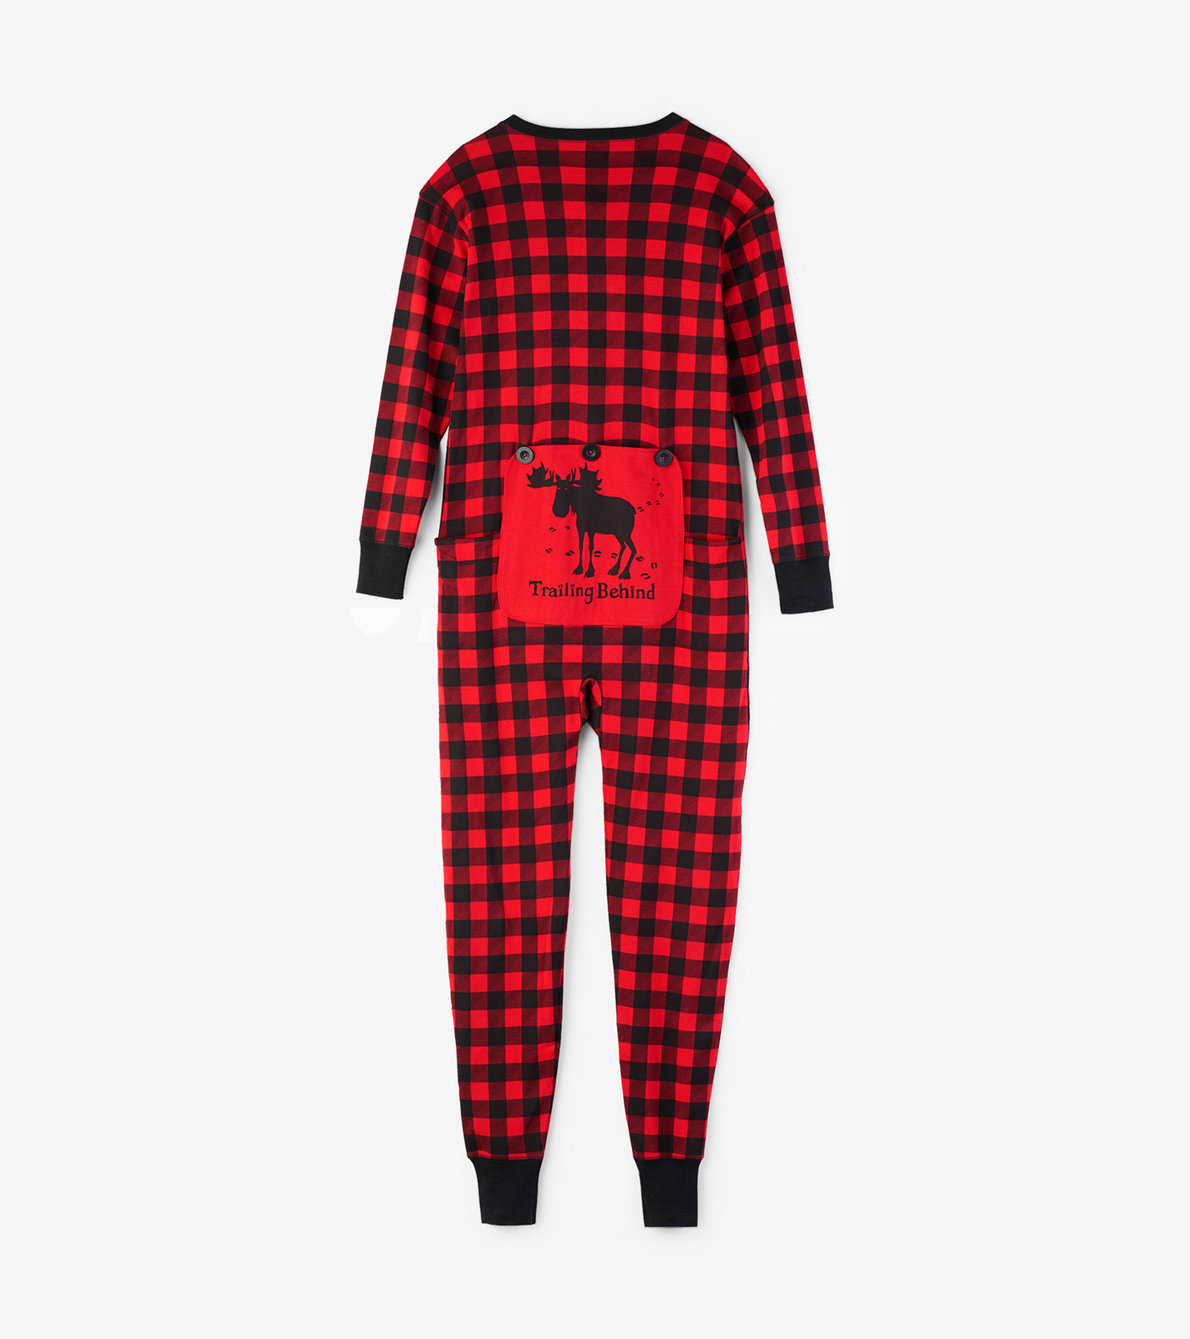 View larger image of "Trailing Behind" Buffalo Plaid Adult Union Suit